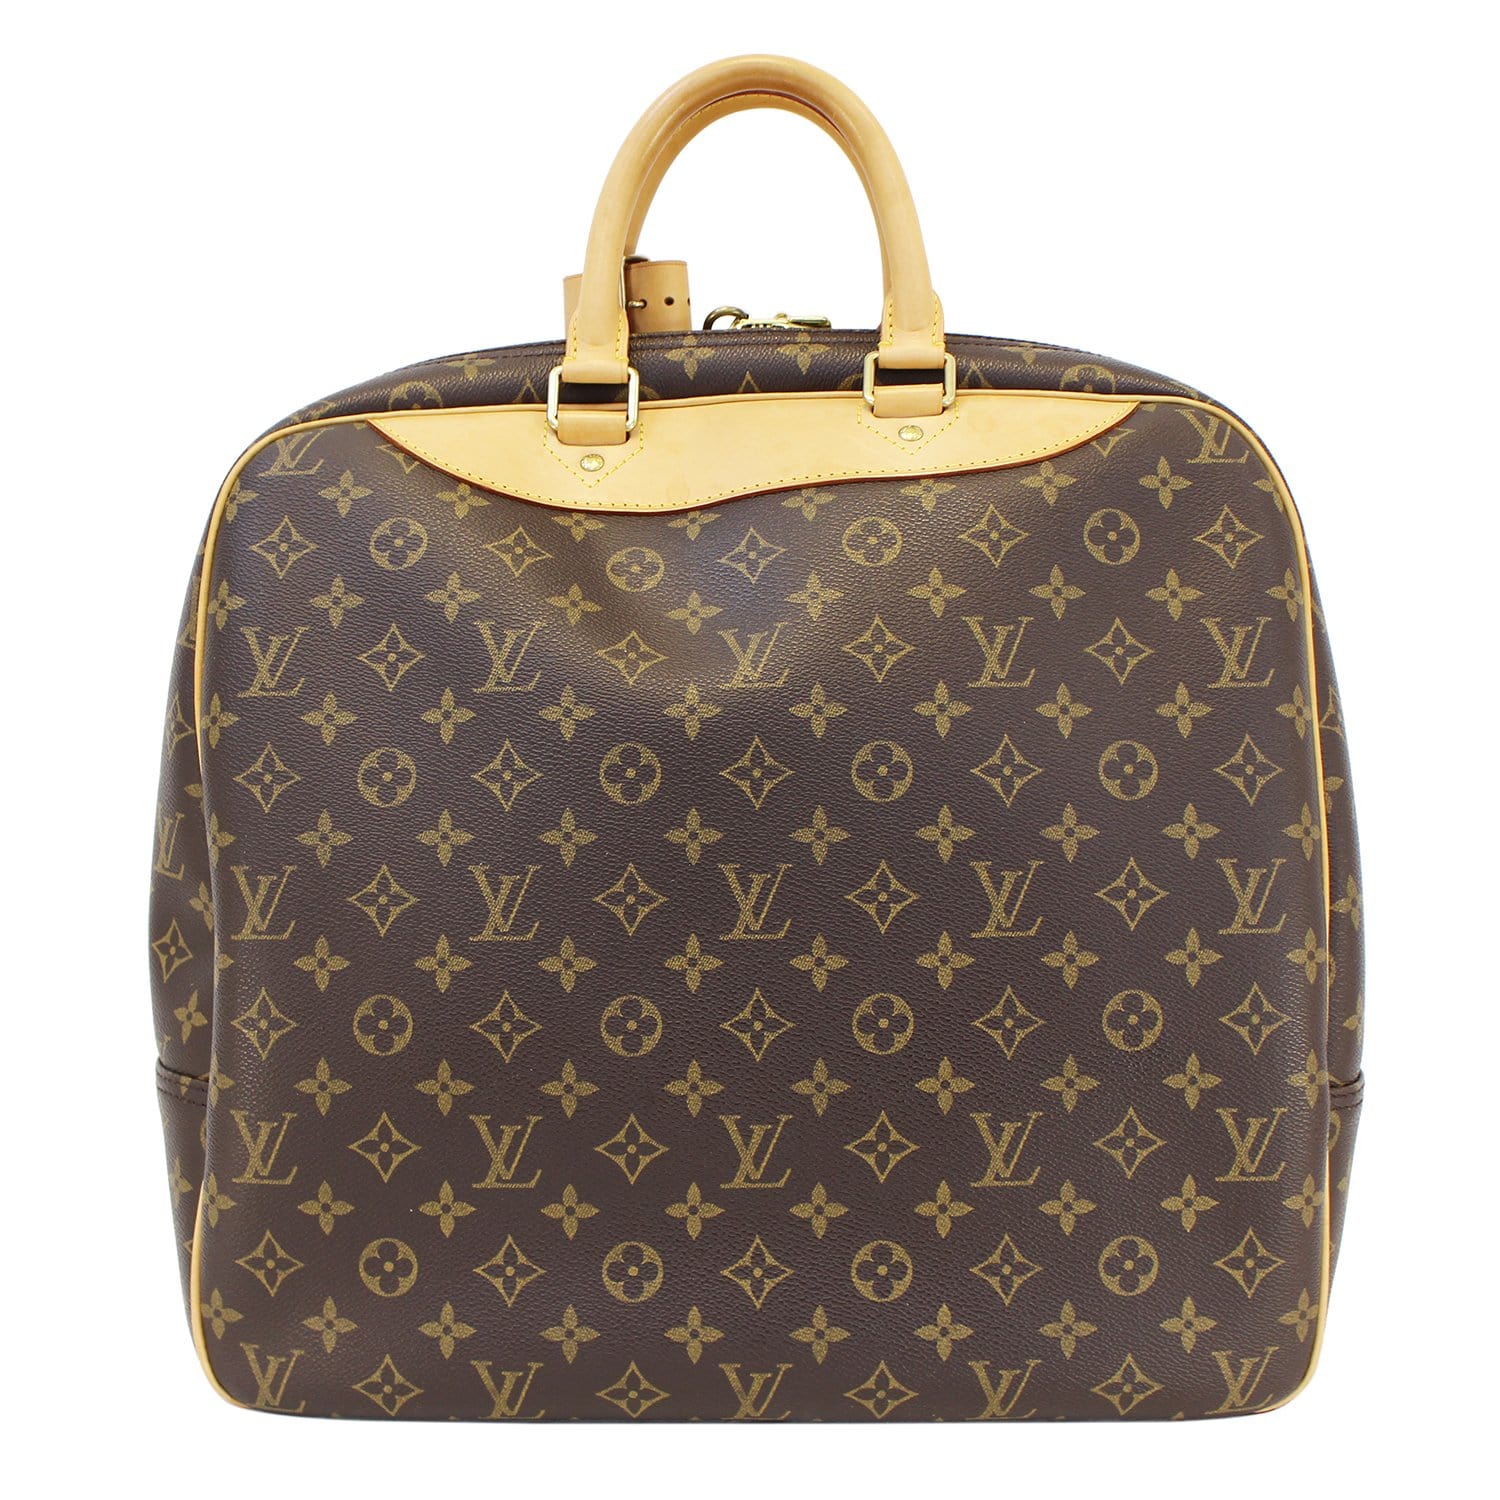 Traveling in Style with Louis Vuitton